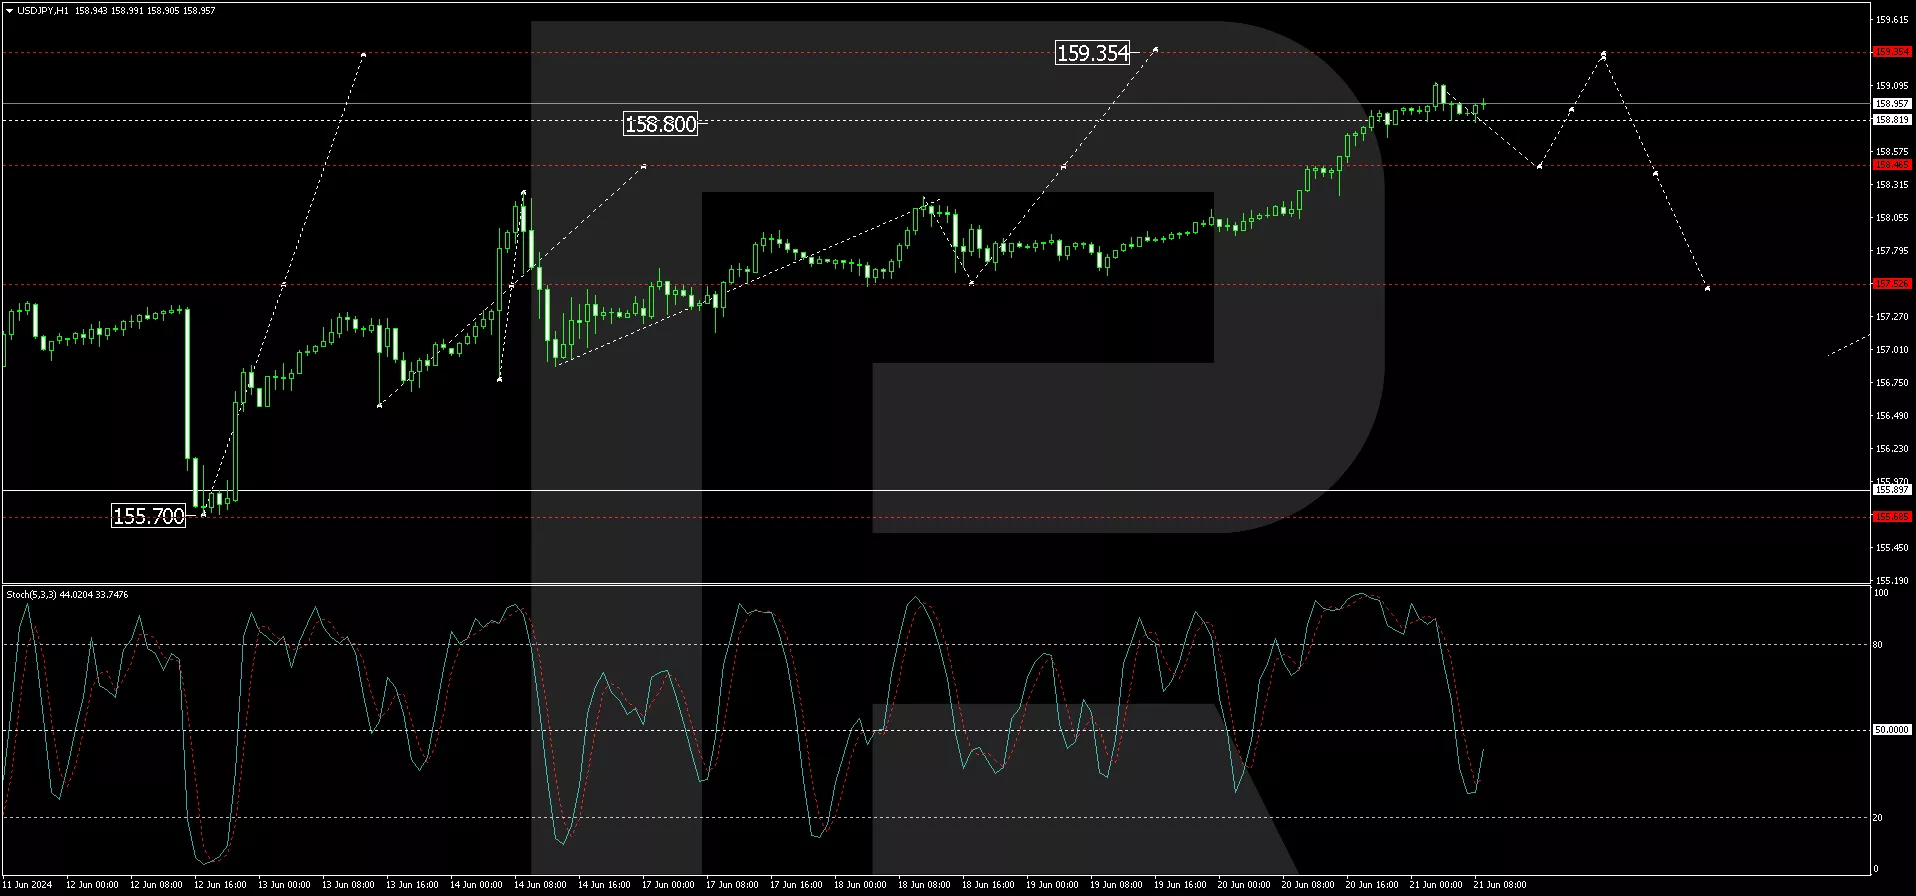 Technical analysis of USD/JPY